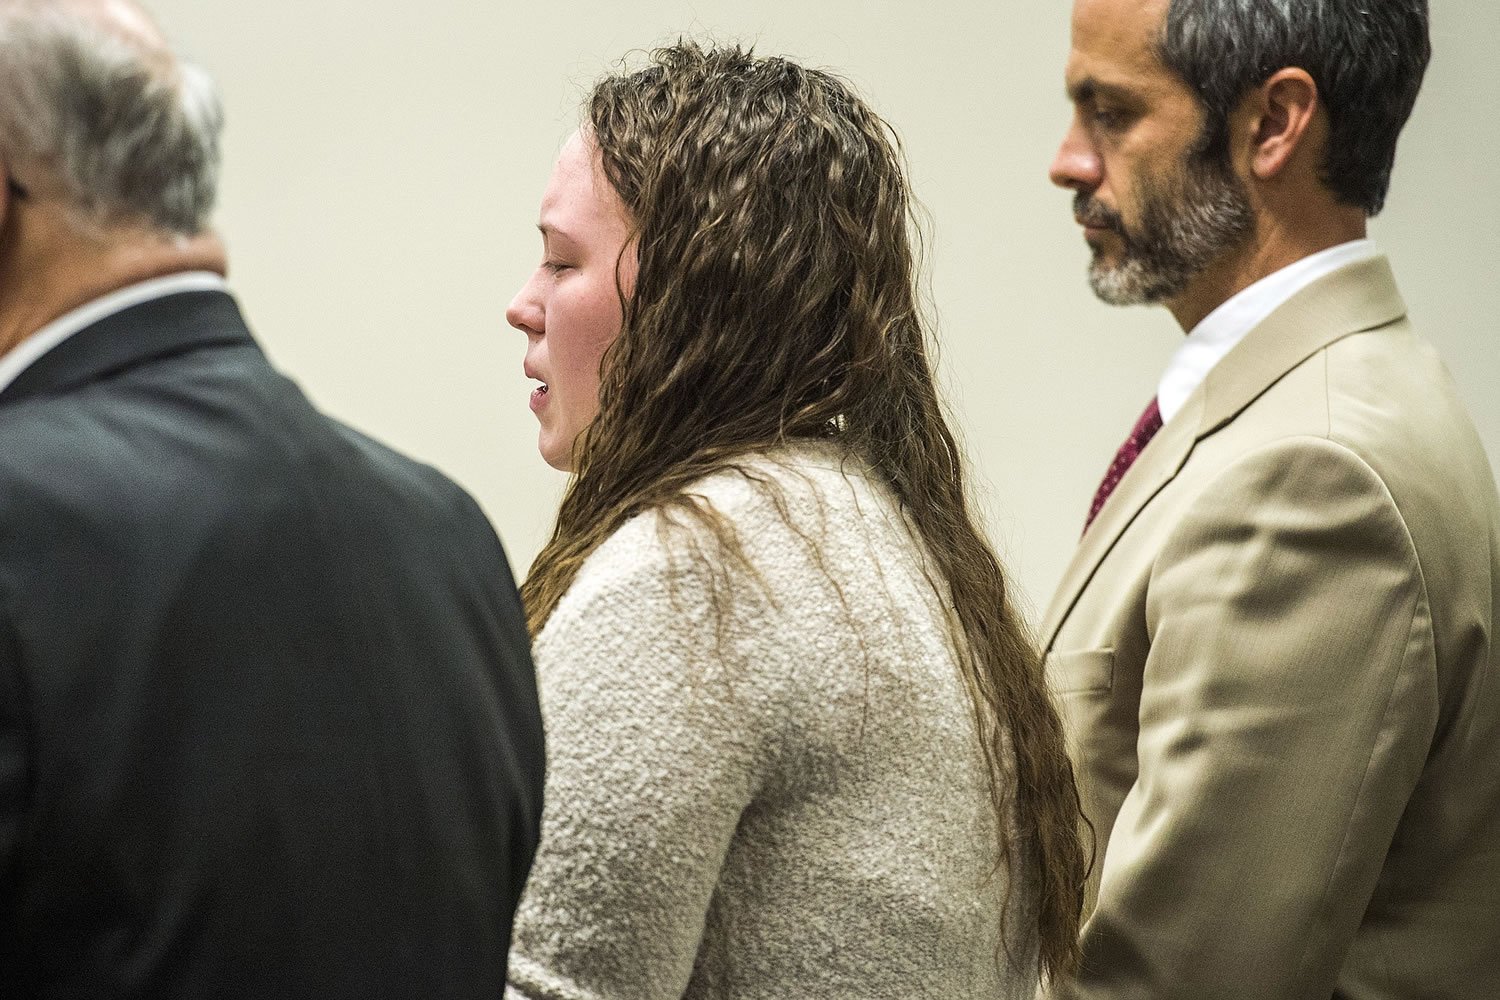 Meagan Grunwald reacts as the guilty verdict is read Saturday in Provo, Utah.